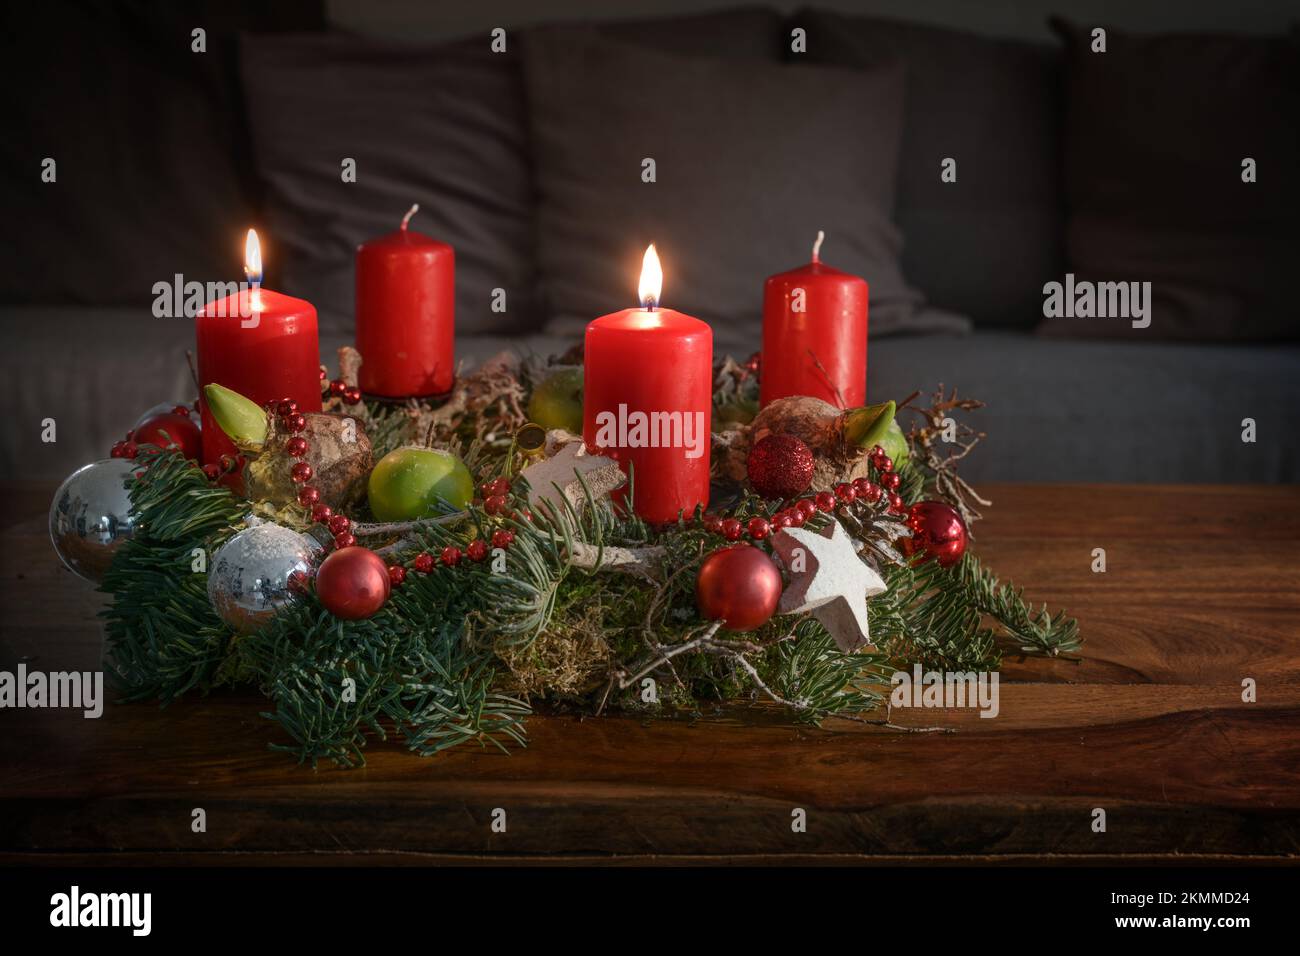 Advent wreath with two burning red candles and Christmas decoration on a wooden table in front of the couch, festive home decor for the second Sunday, Stock Photo